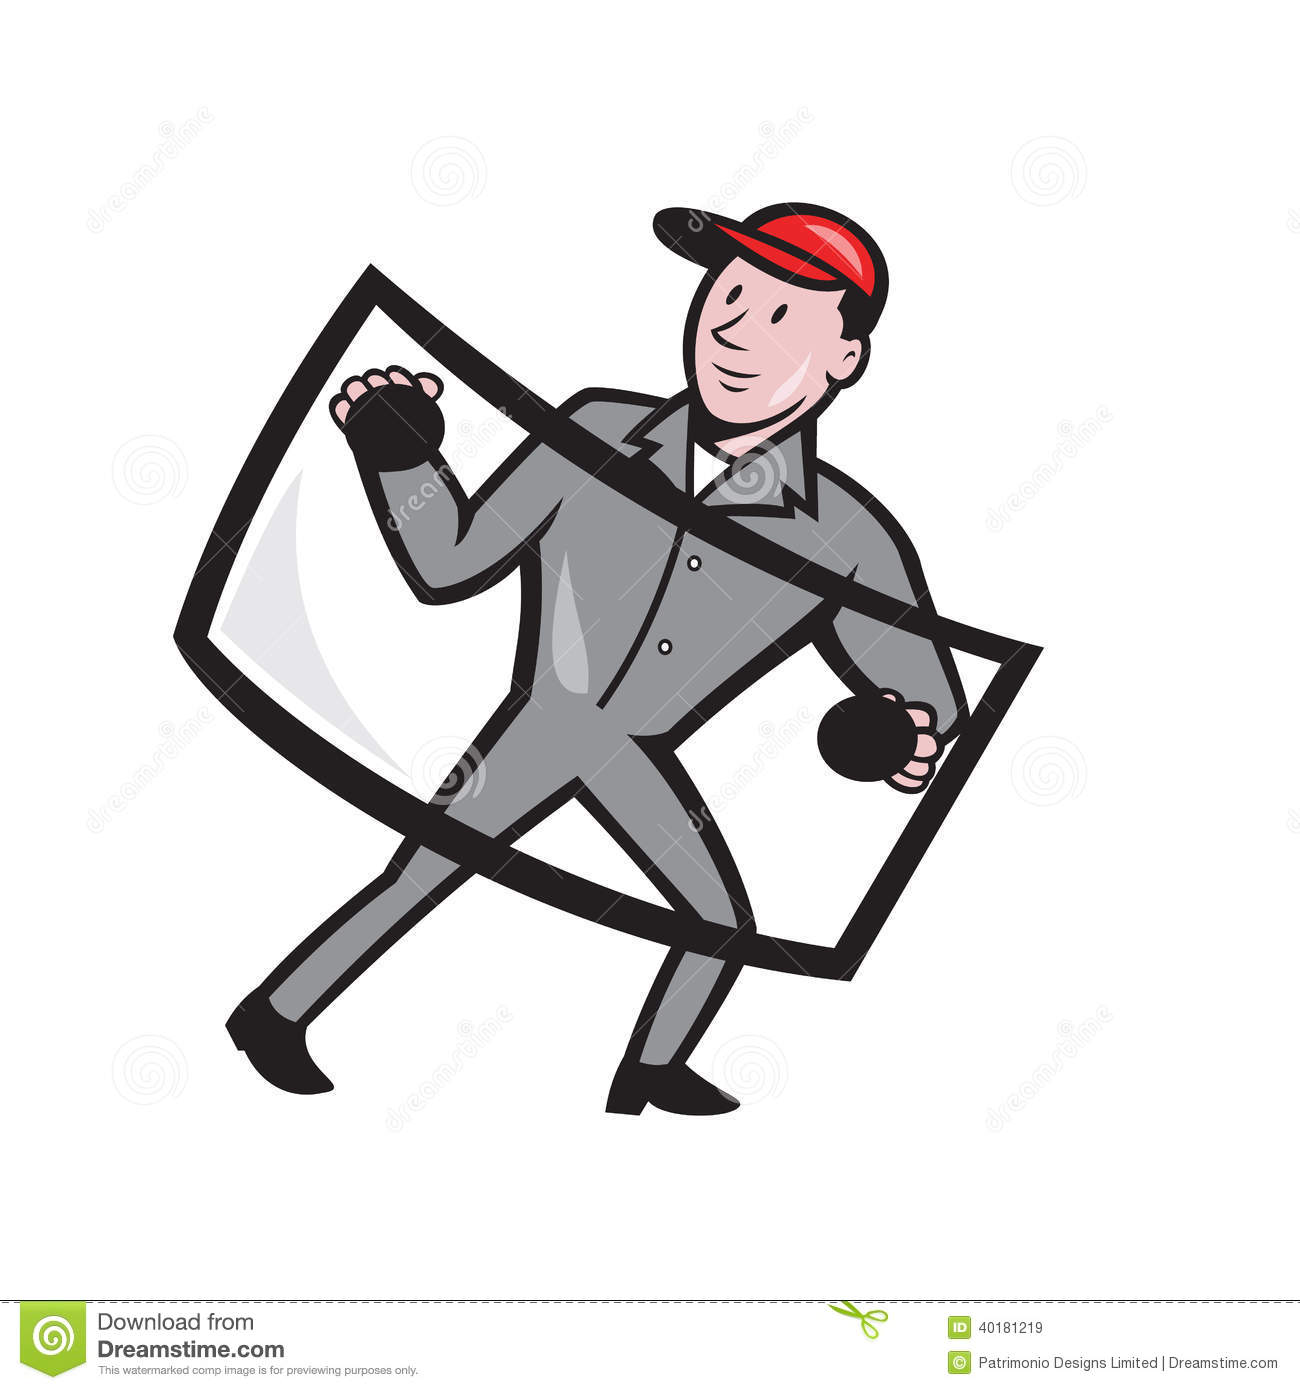 Illustration Of Automotive Glass Installer Carrying Windshield Viewed